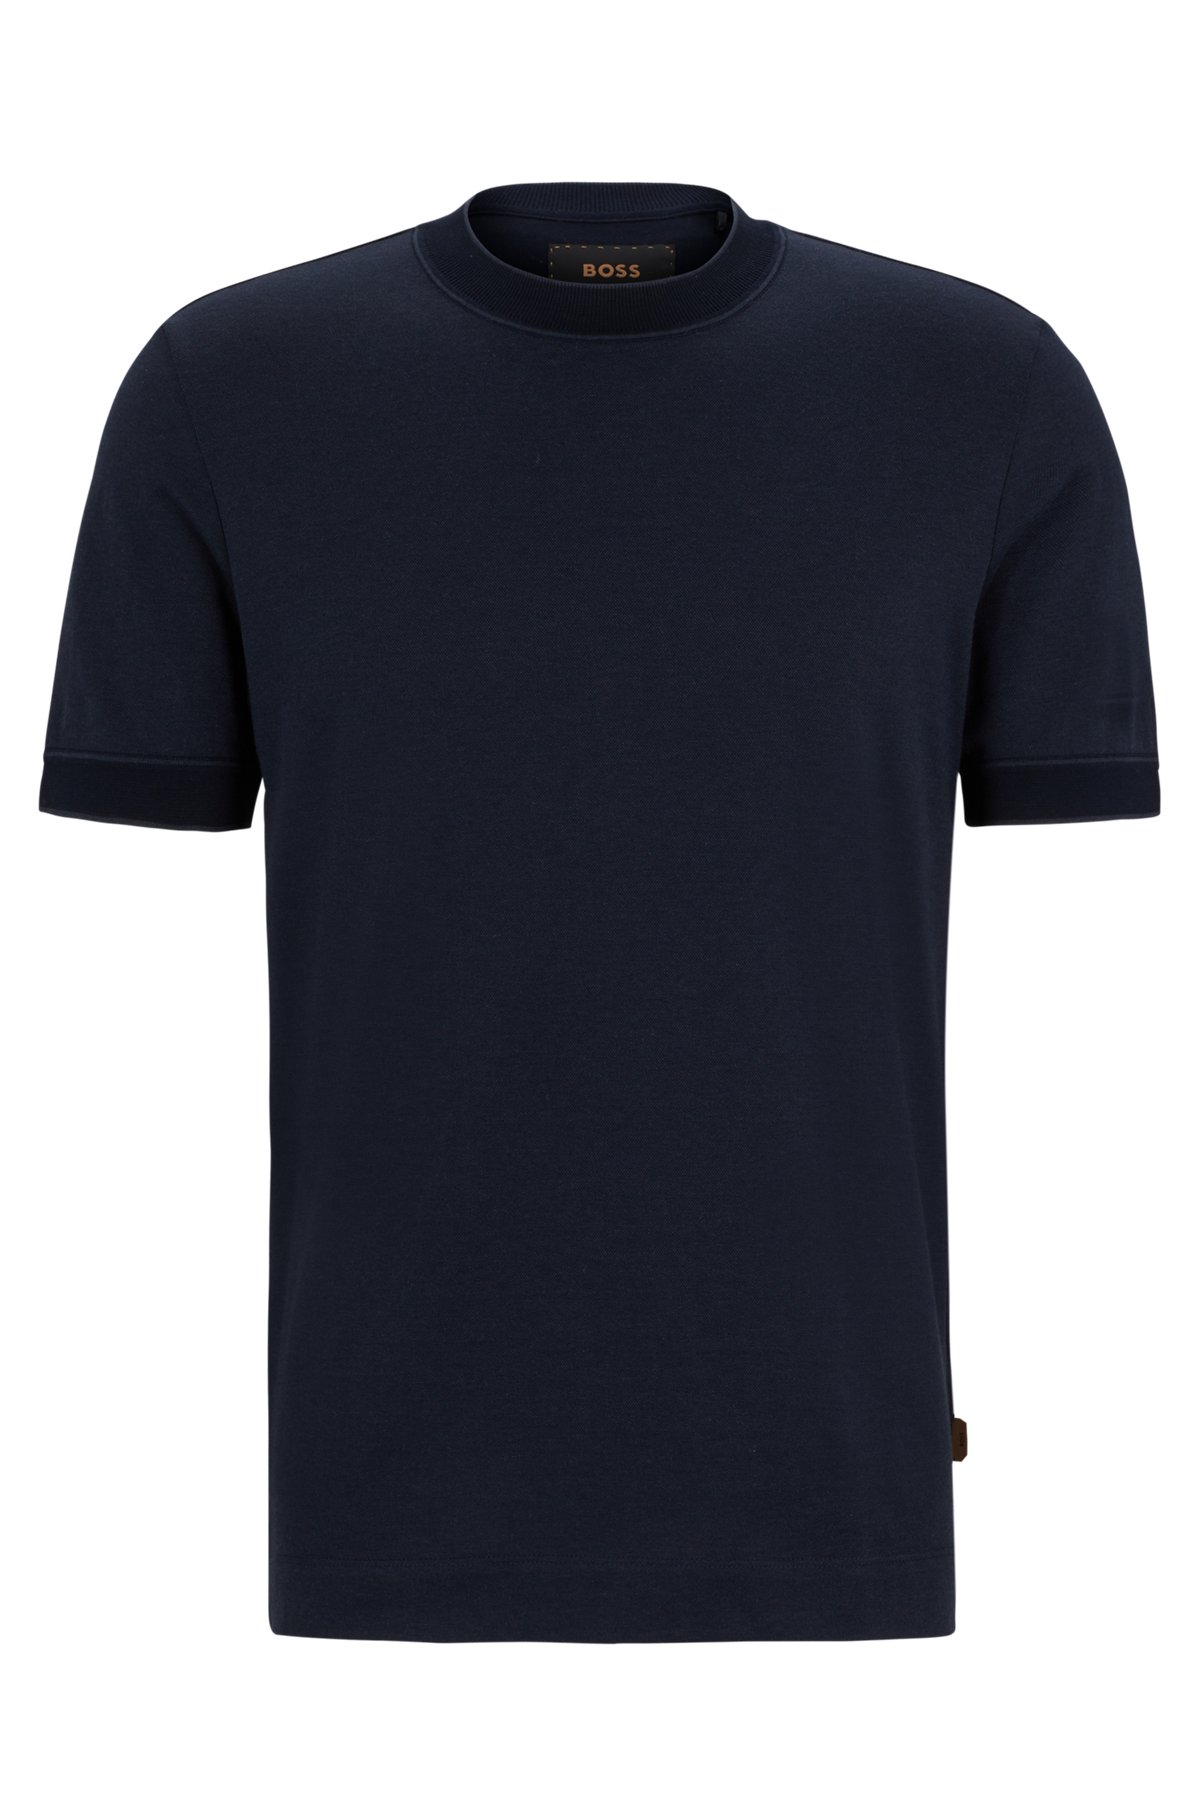 BOSS - Regular-fit T-shirt in two-tone cotton and cashmere